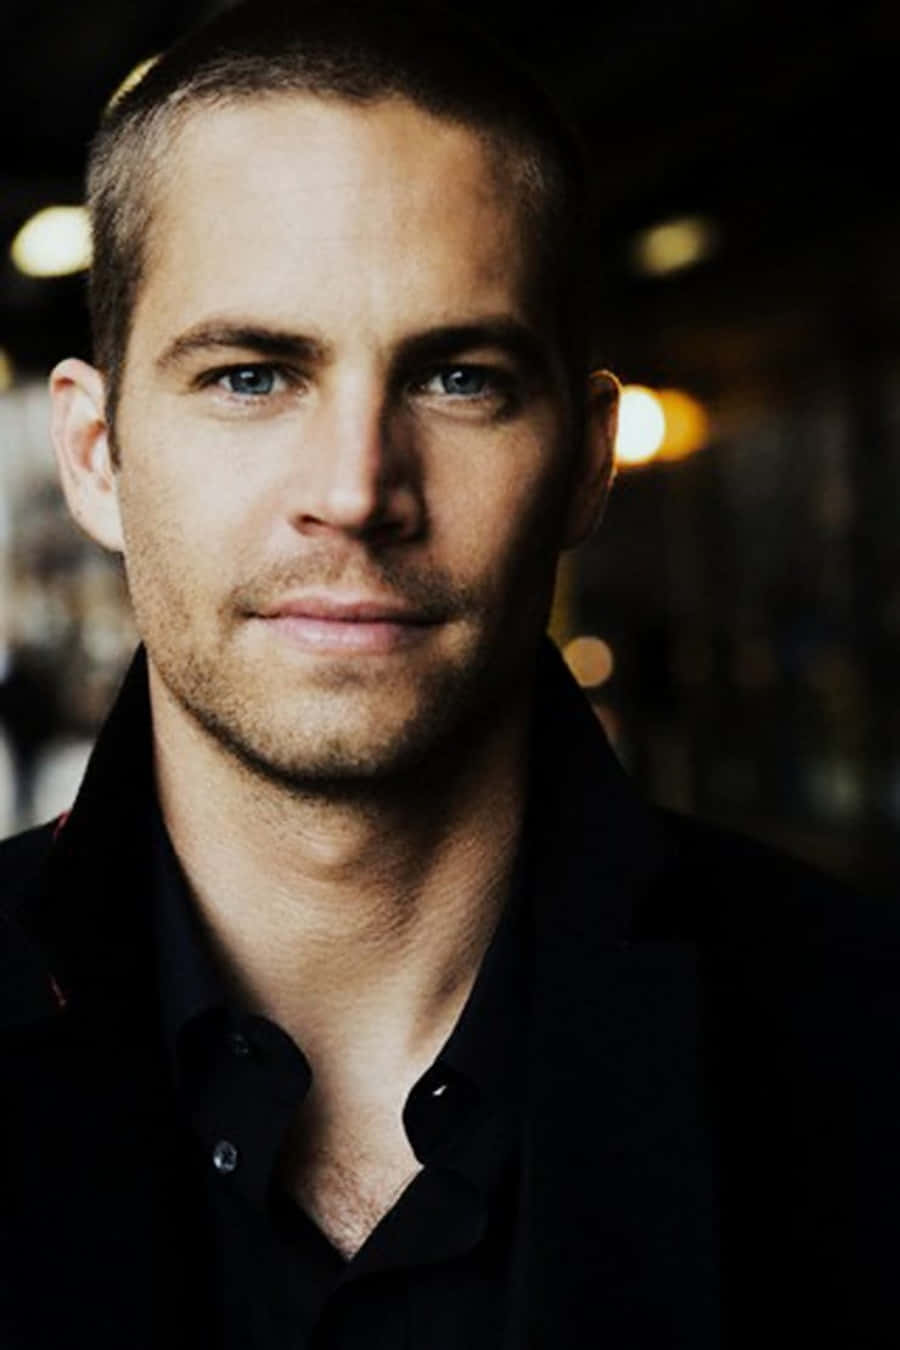 Paul Walker, an Iconic Actor